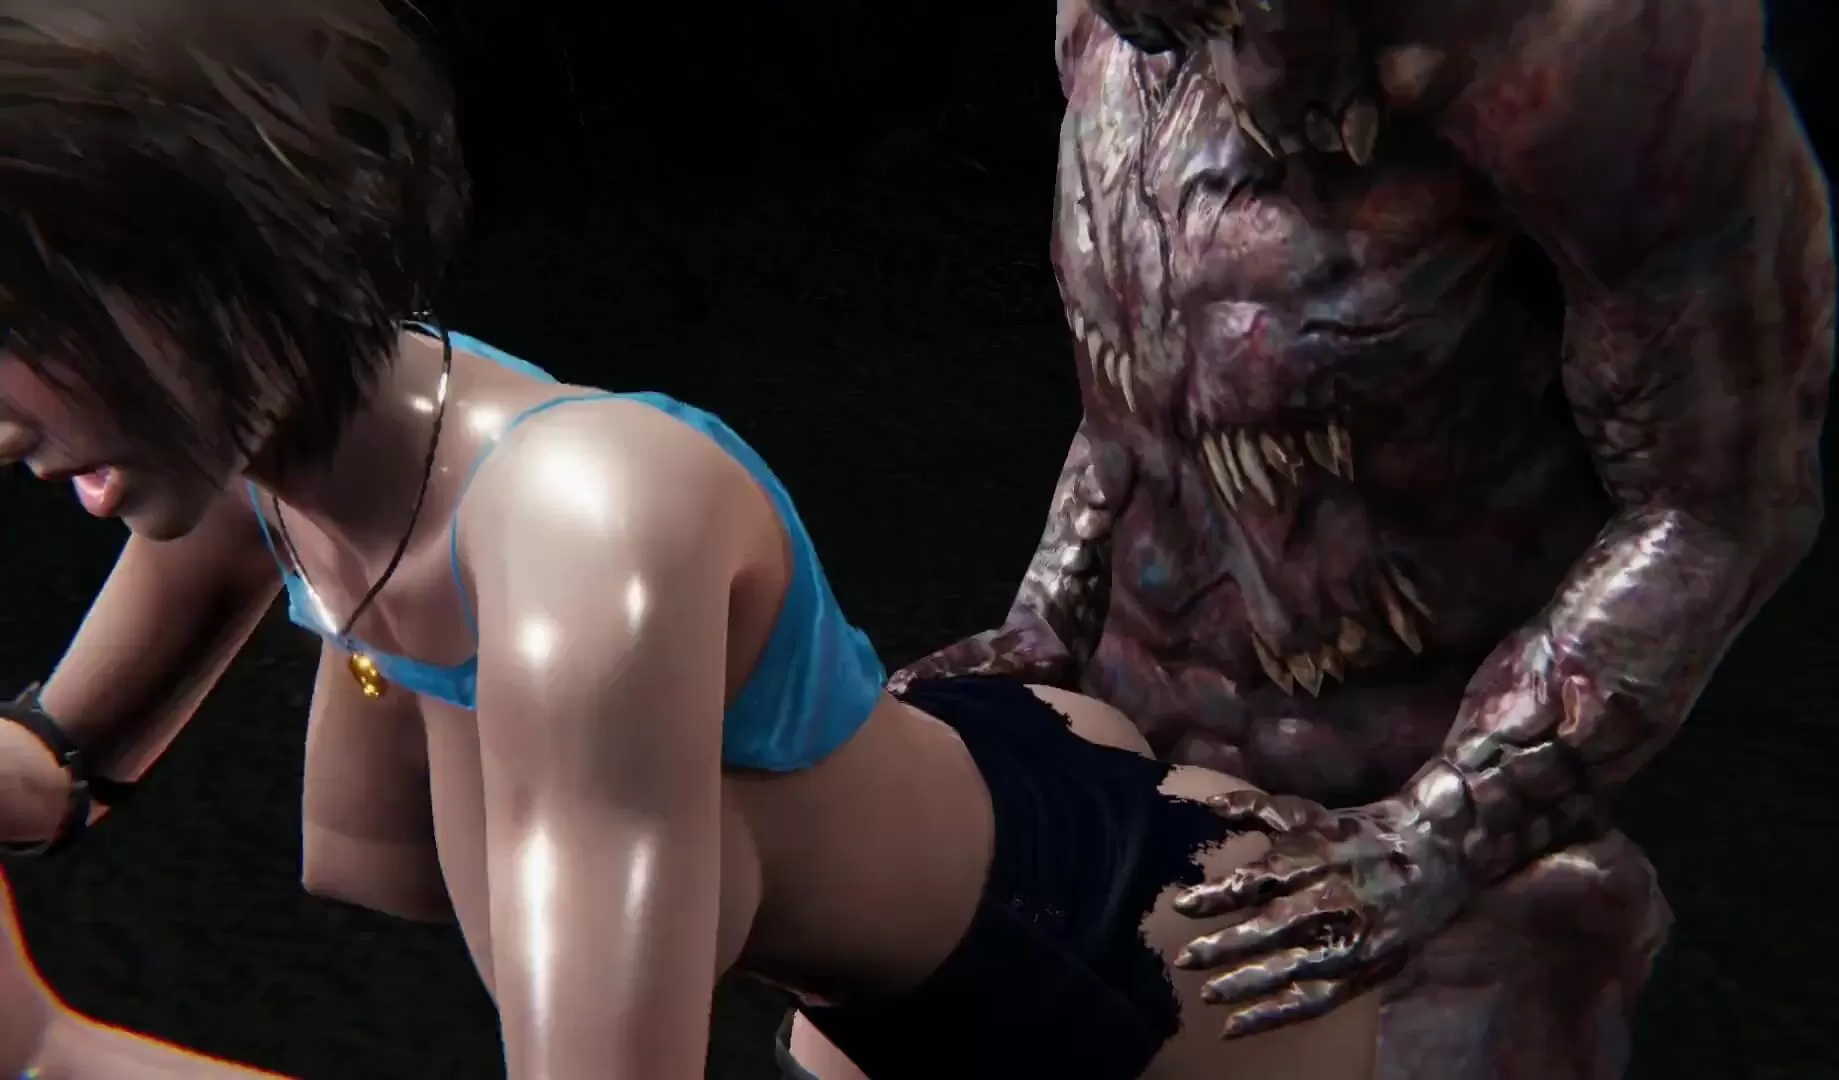 Hardcore Resident Evil Hentai - Jill Valentine Resident Evil Anal Zombie Fuck and Deepthroat, ATM,  Squirting 3D Hentai watch online